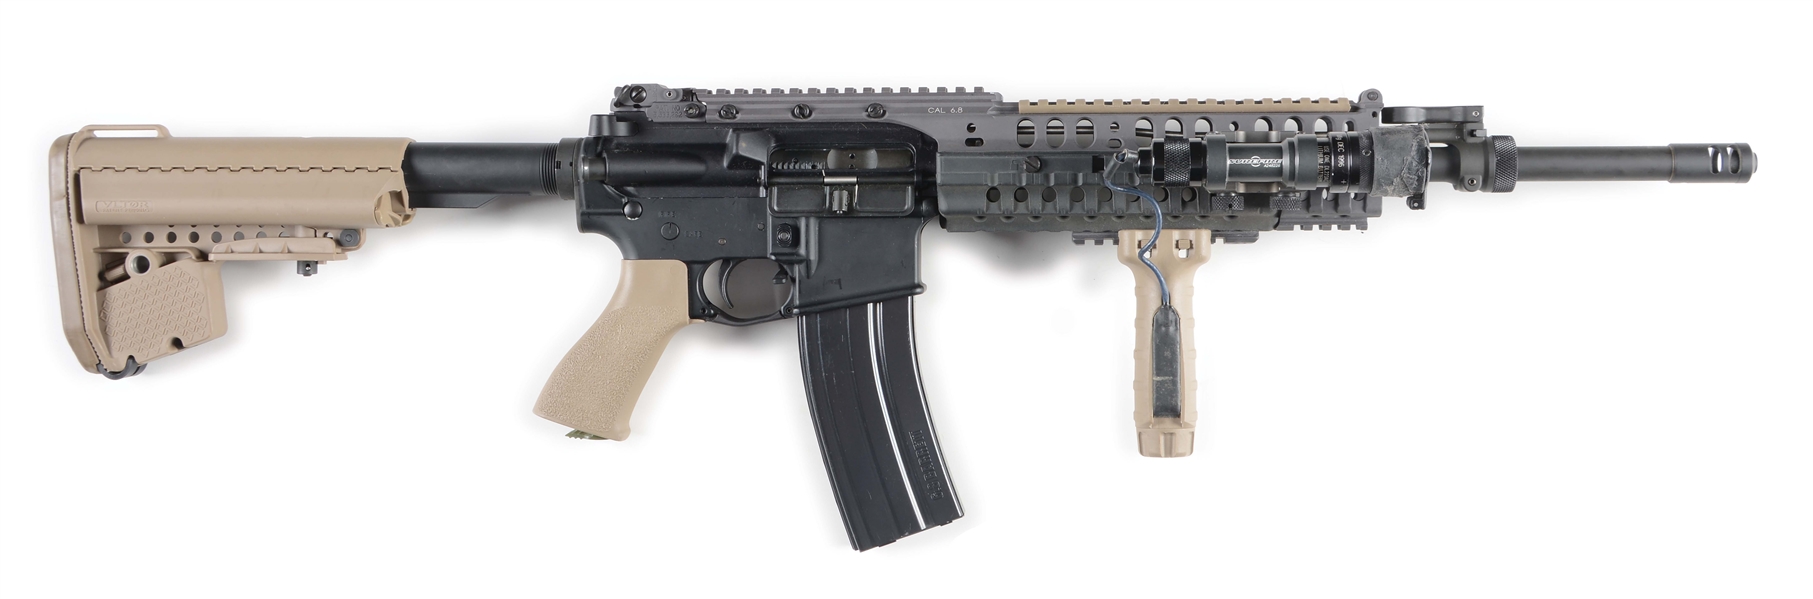 (M) STAG ARMS AR-15 WITH BARRETT 6.8 SPC UPPER AND AFTERMARKET UPGRADES.